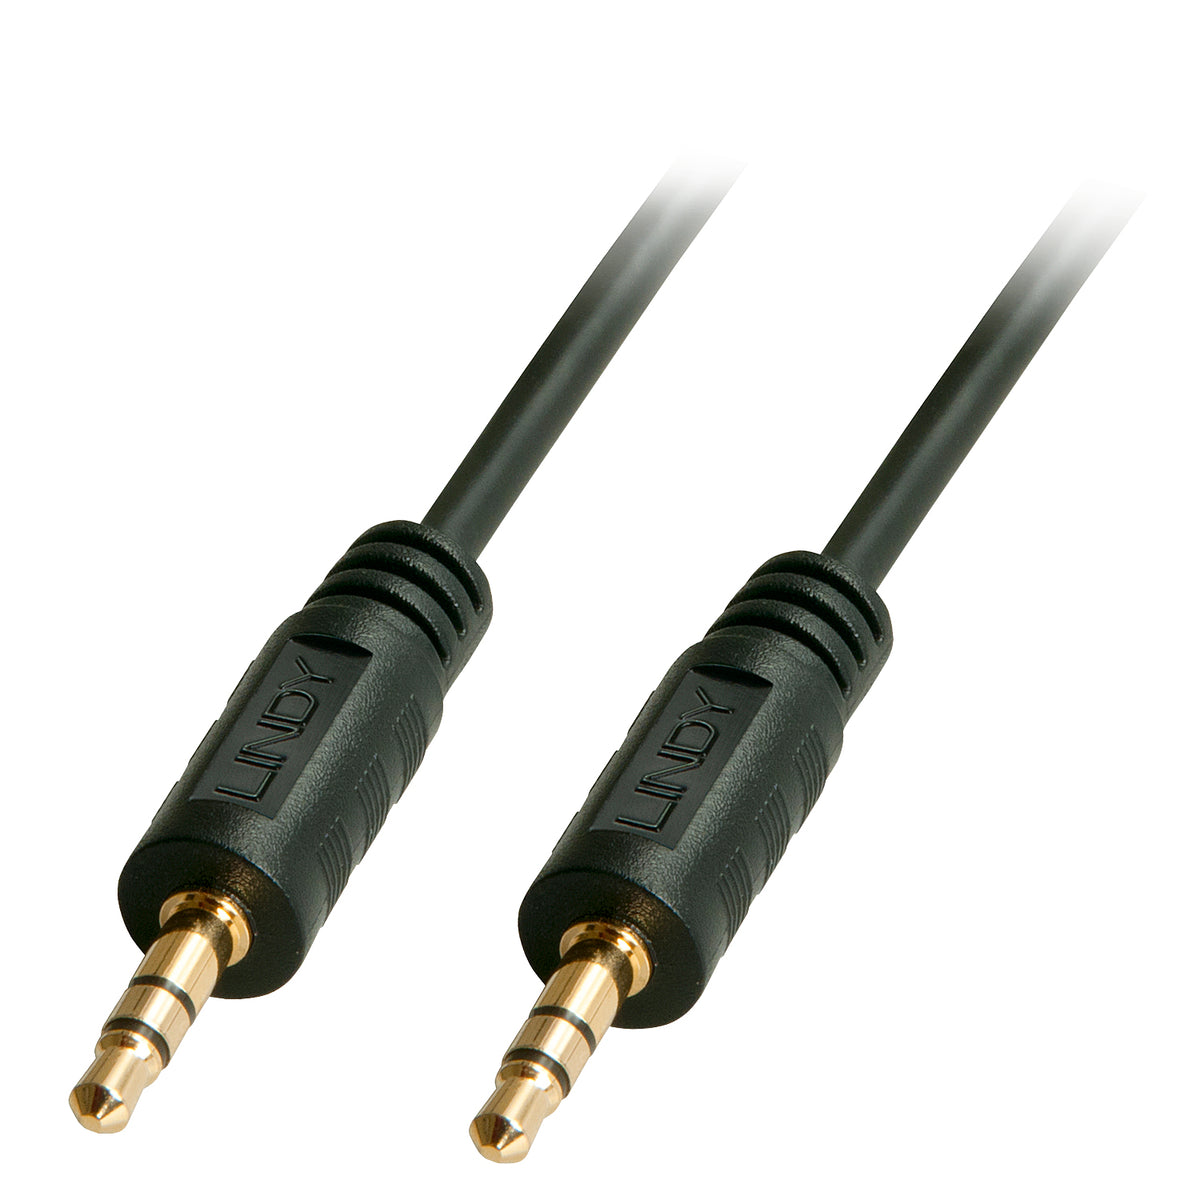 Lindy Audio Cable 3.5 mm Stereo/1m